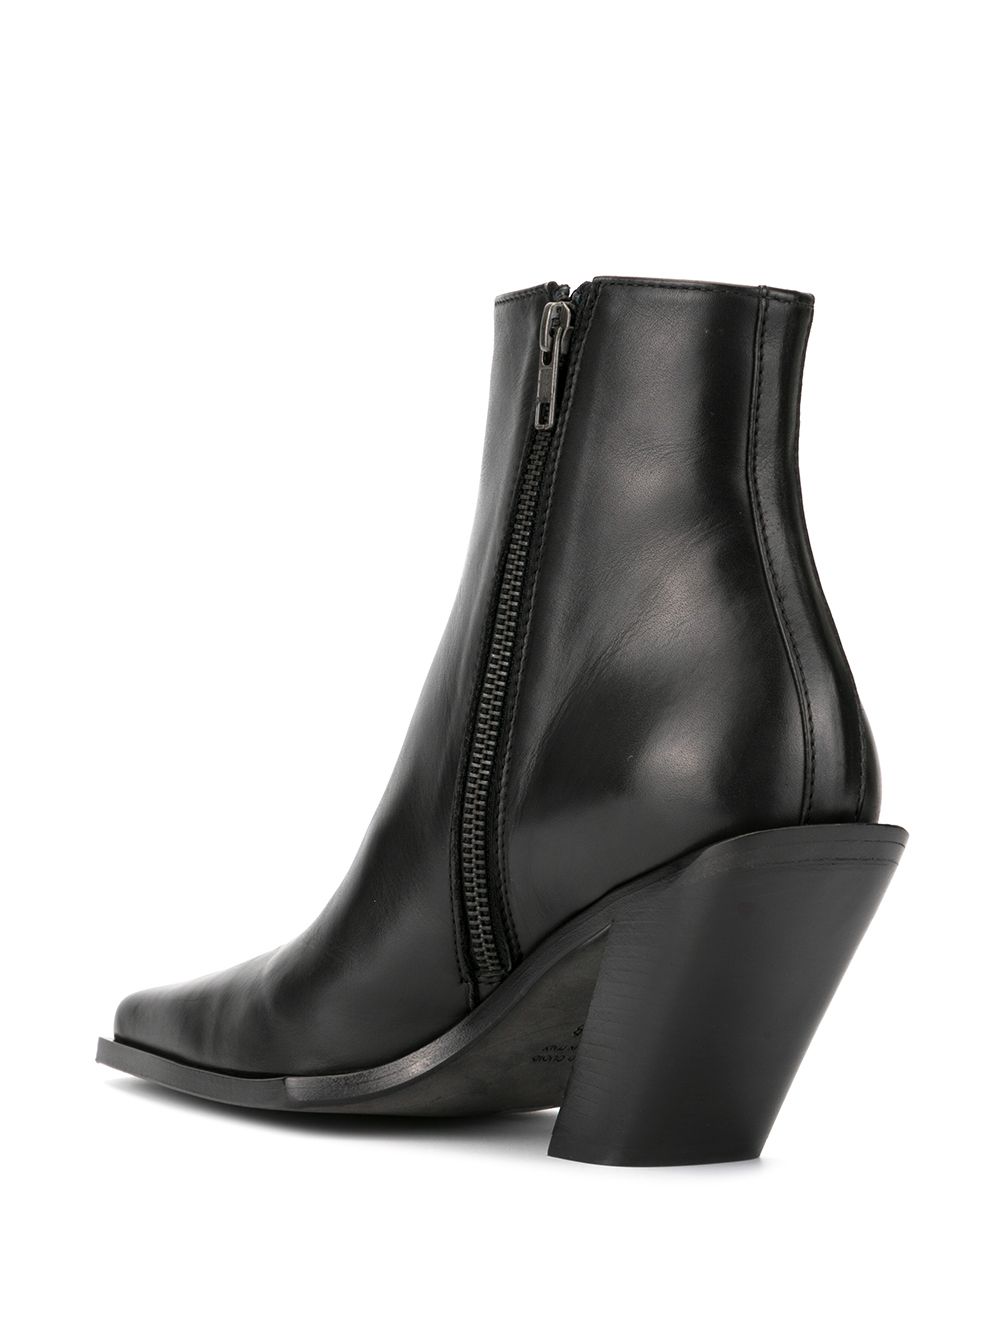 Ann Demeulemeester 100mm Pointy Western Ankle Boots - Farfetch